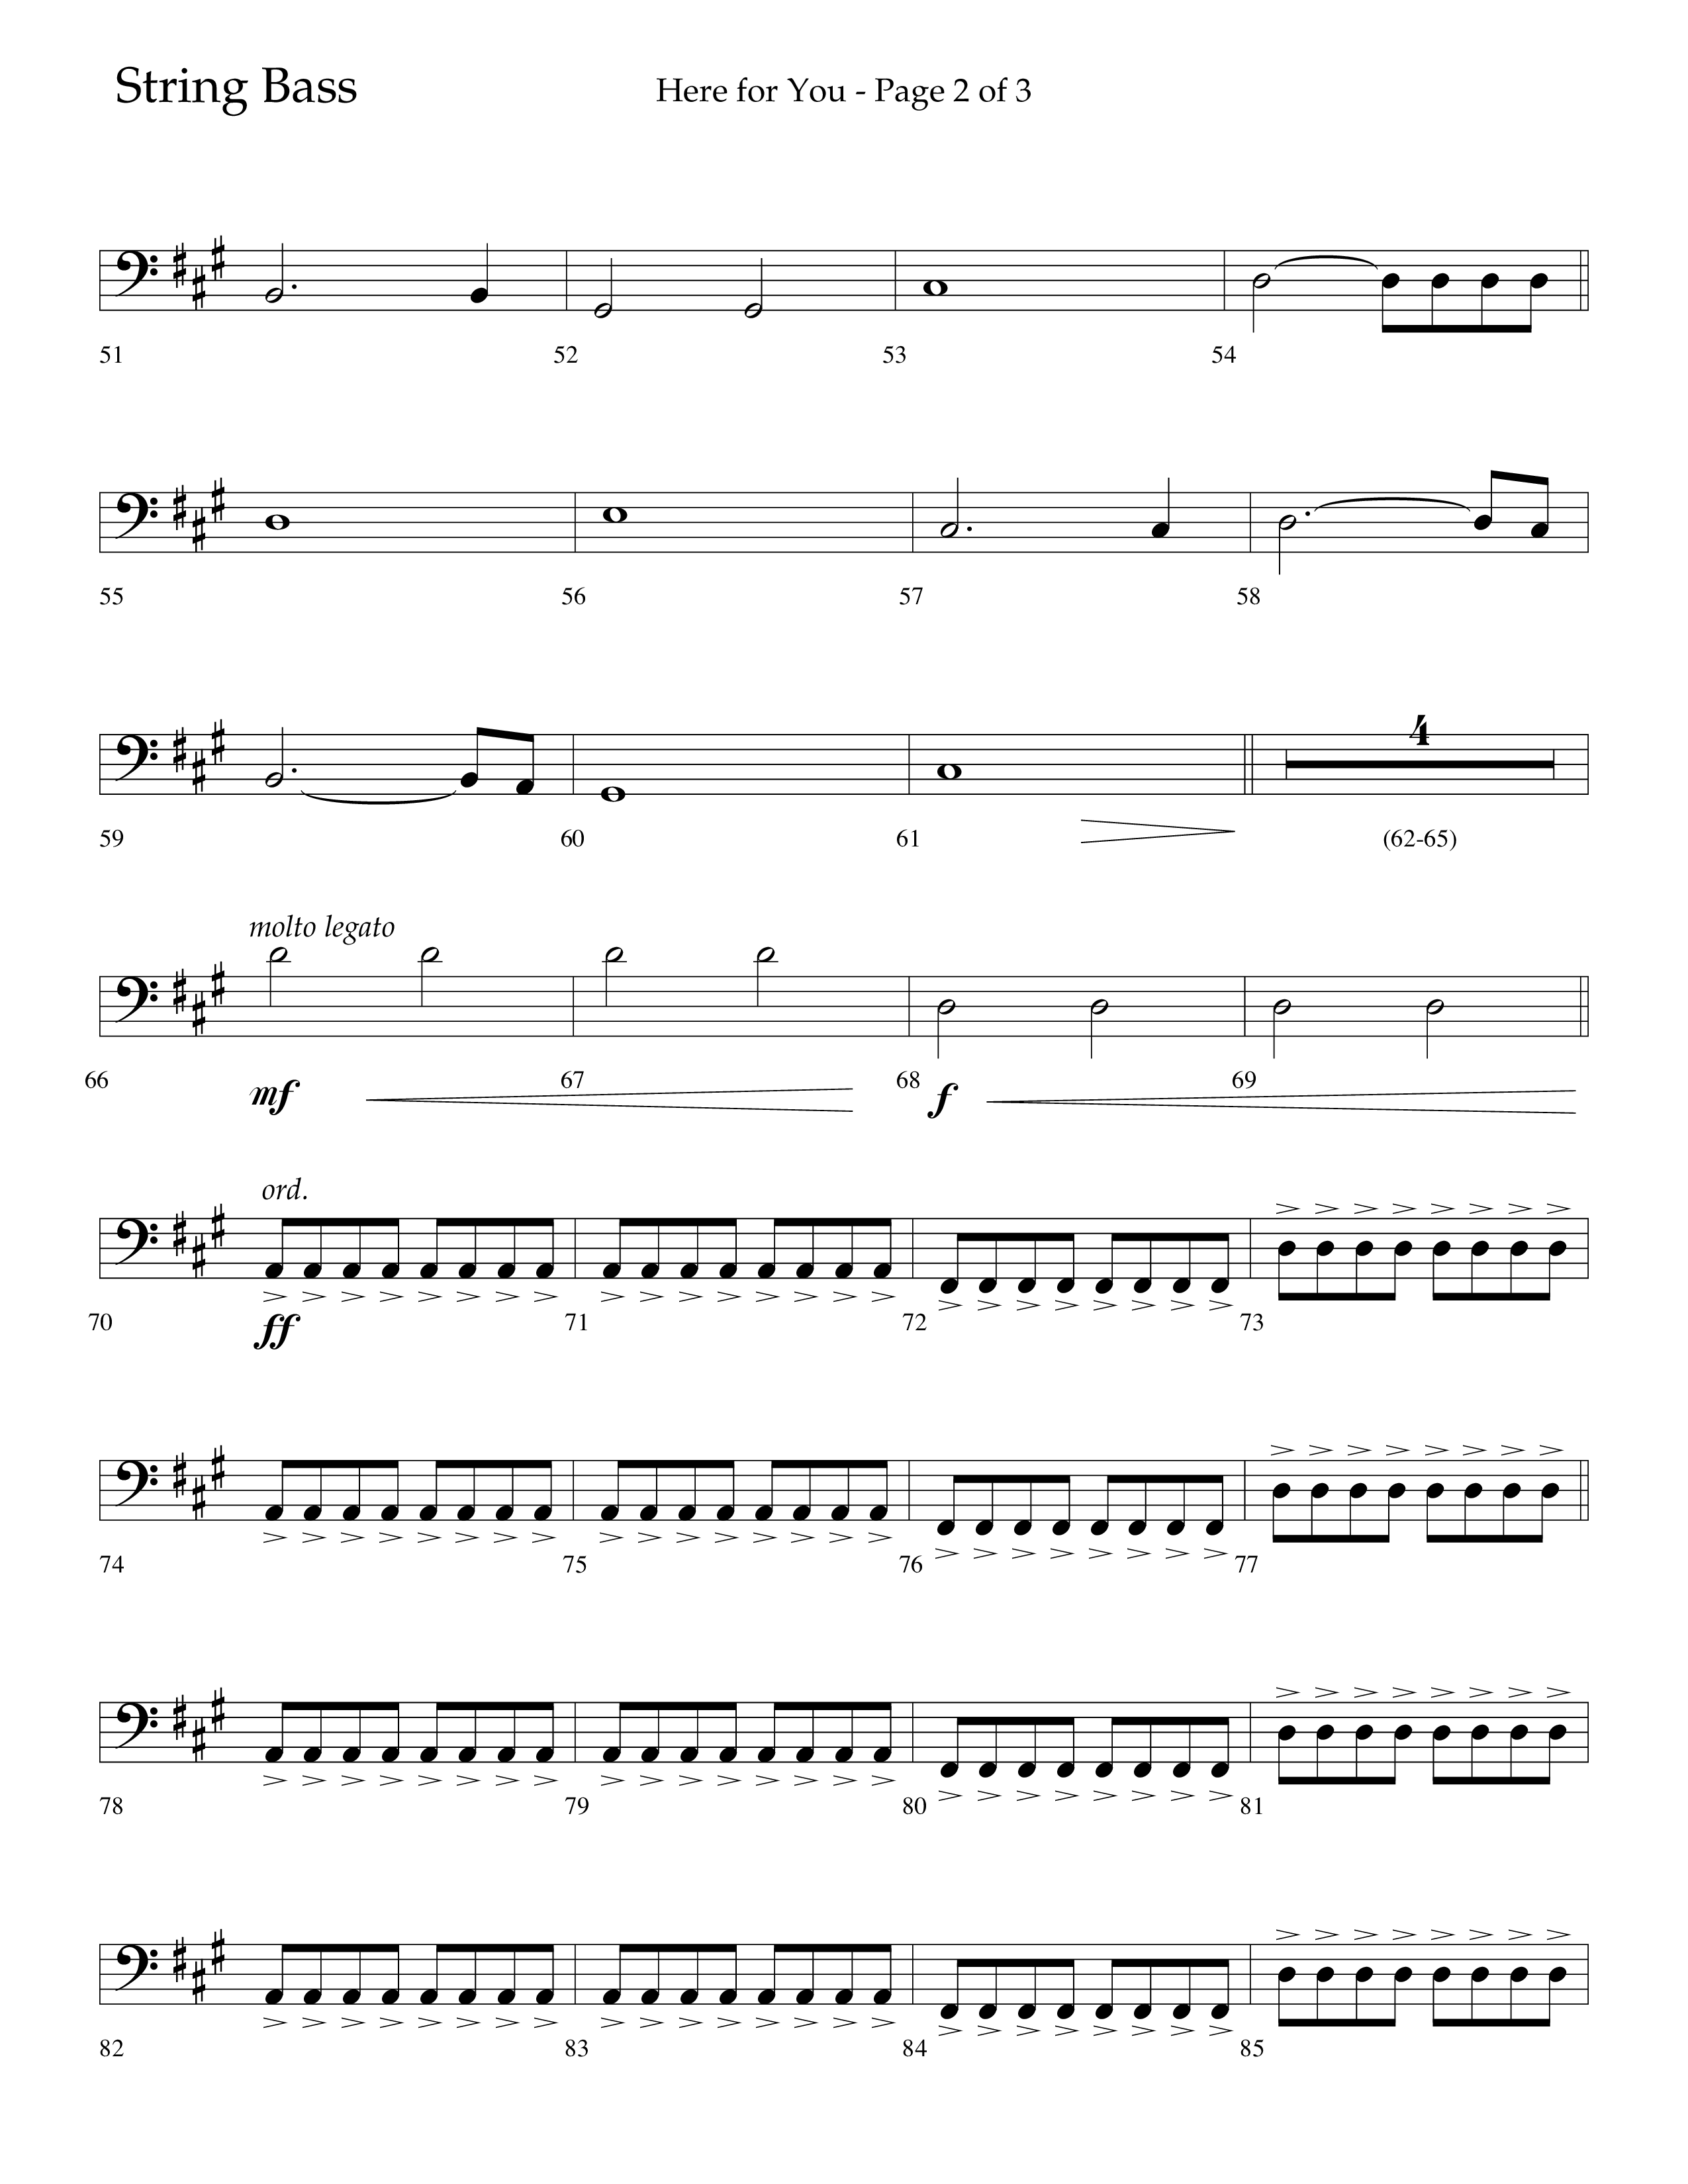 Here For You (Choral Anthem SATB) String Bass (Lifeway Choral / Arr. Travis Cottrell / Orch. Daniel Semsen)